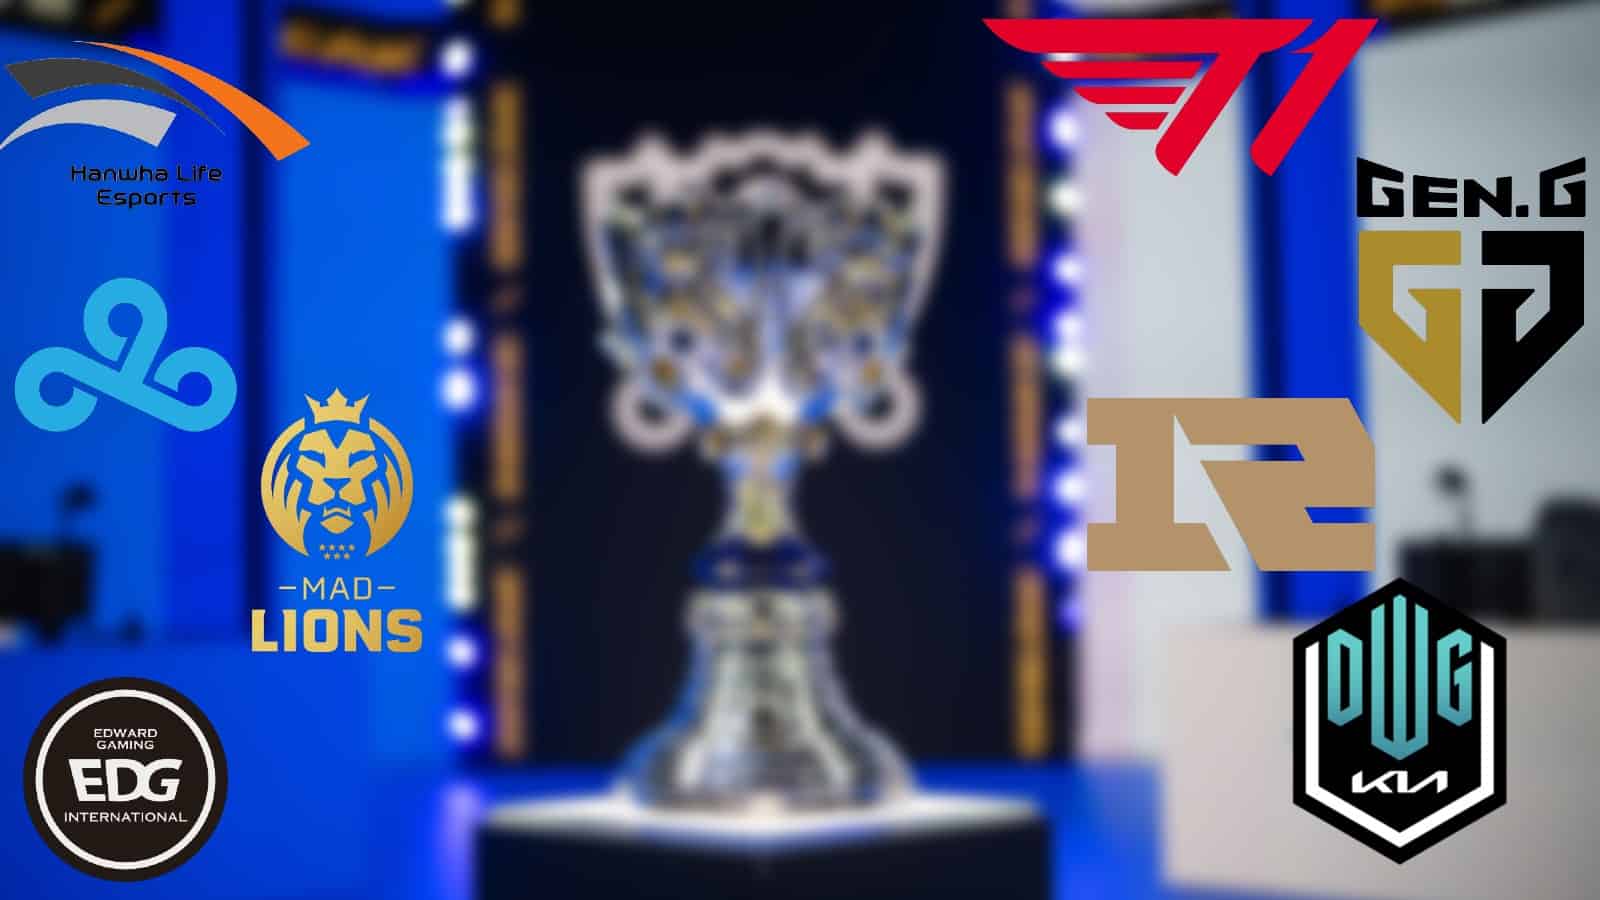 The logos of all Worlds 2021 quarterfinals teams